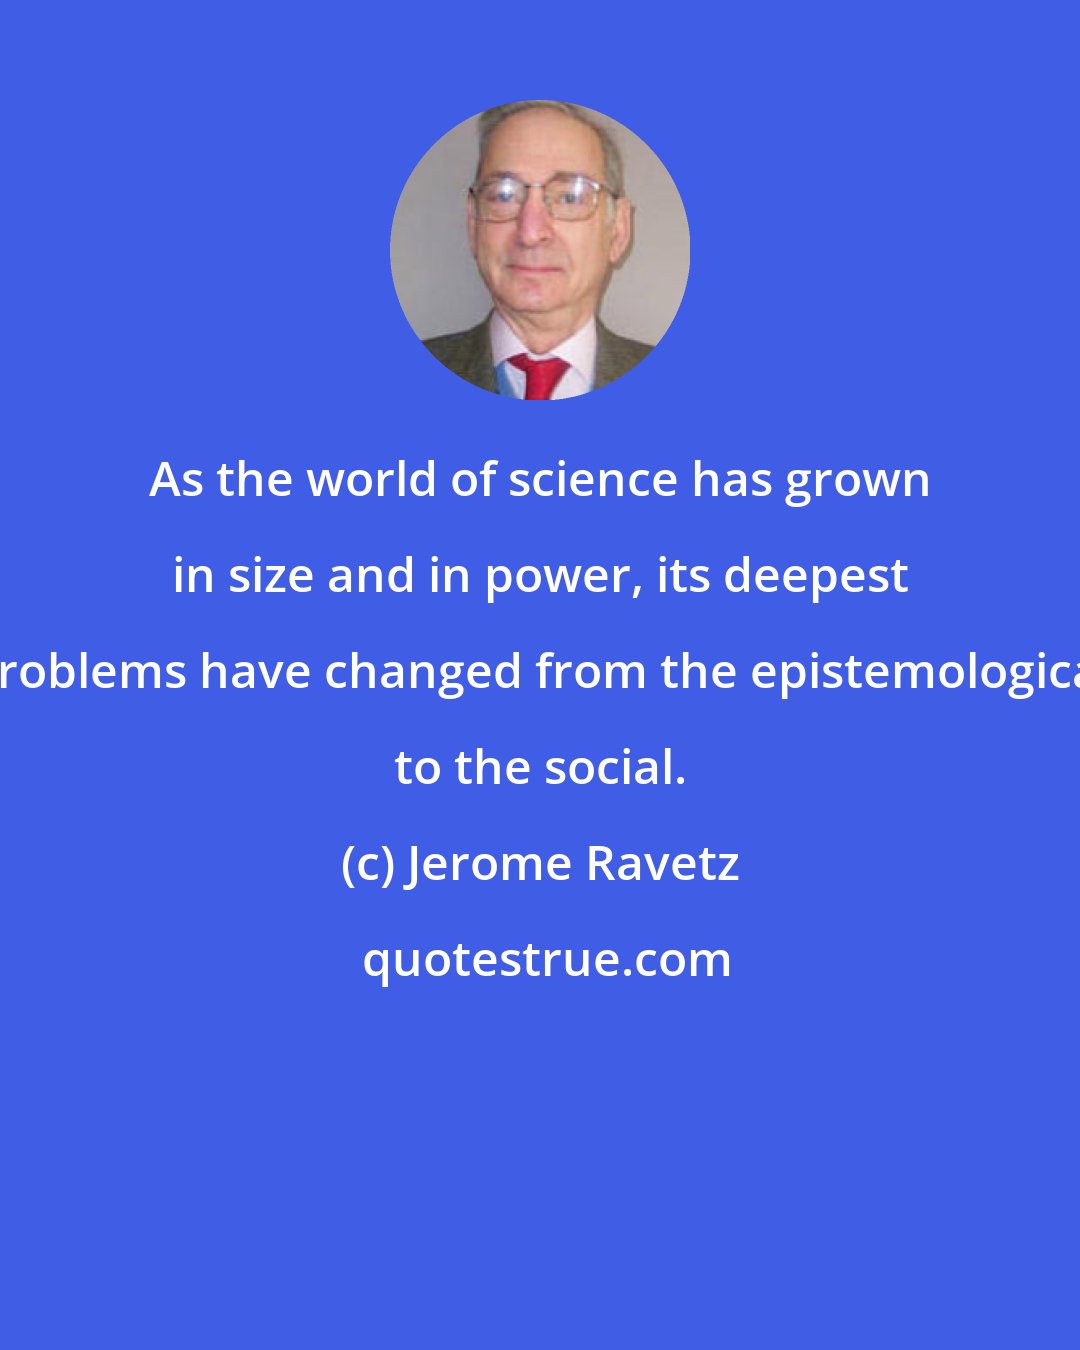 Jerome Ravetz: As the world of science has grown in size and in power, its deepest problems have changed from the epistemological to the social.